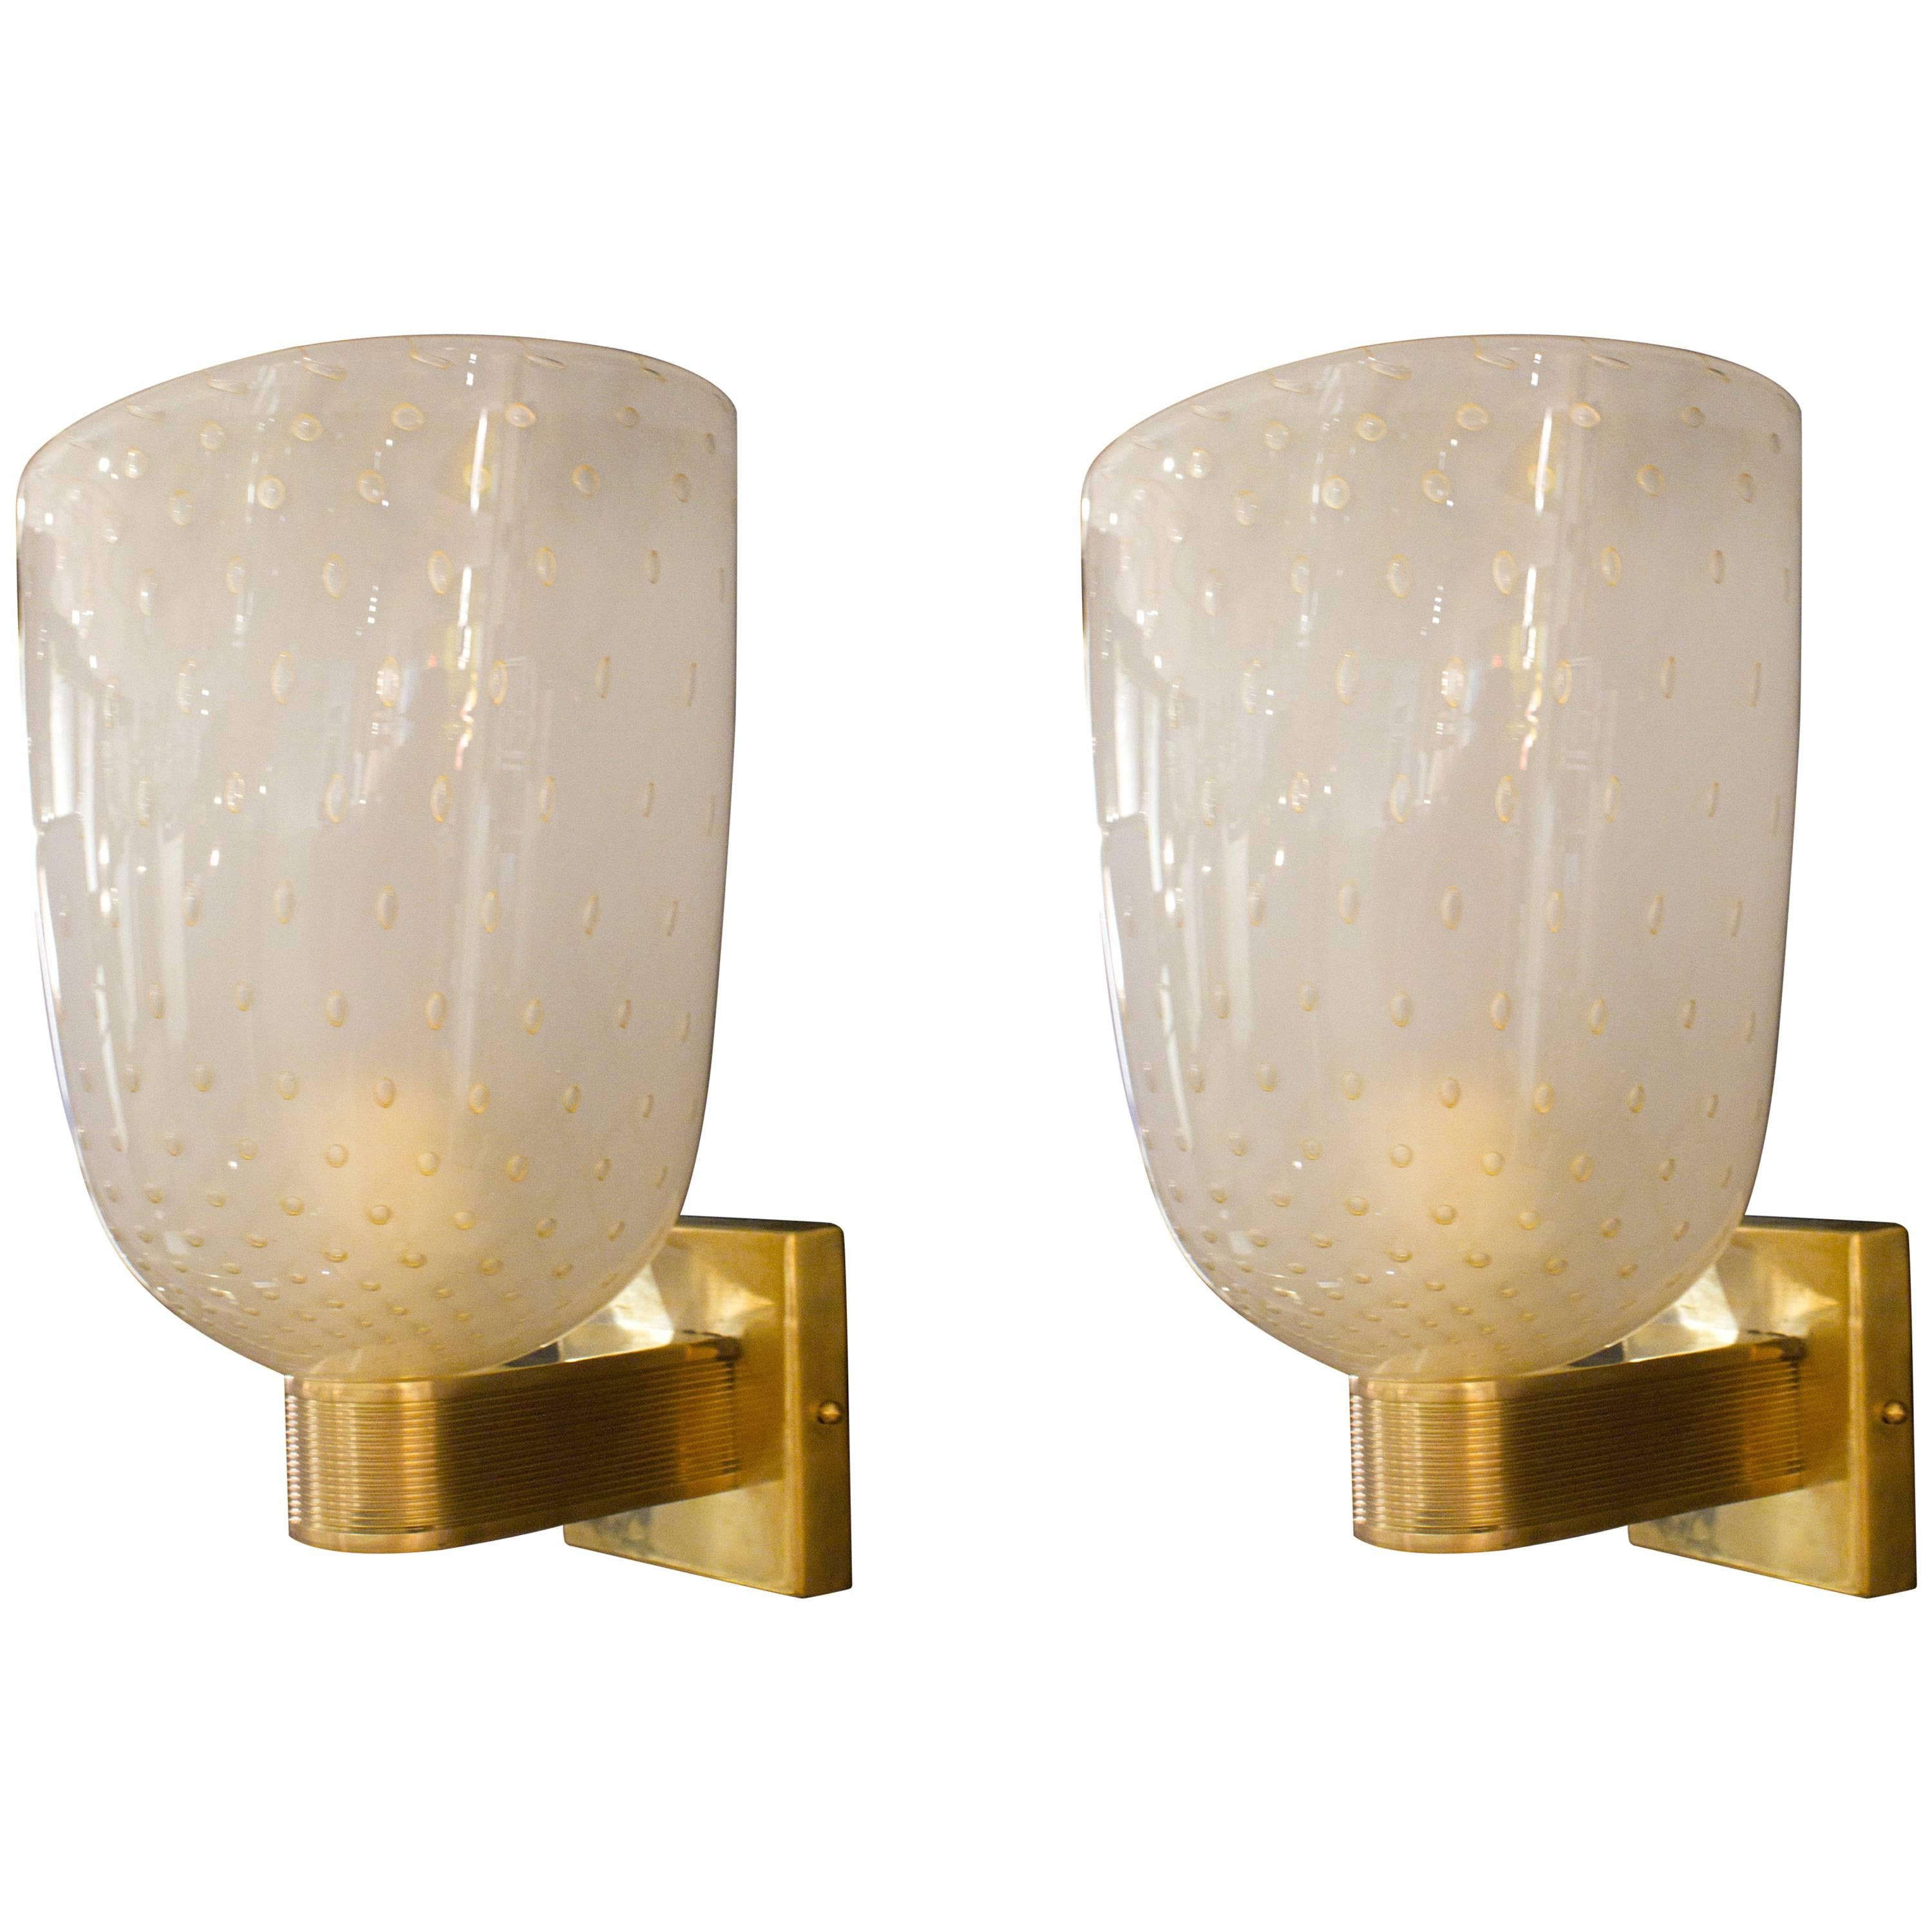 Pair of Italian Ivory and Gold Flecked Murano Glass and Brass Sconces, 2018